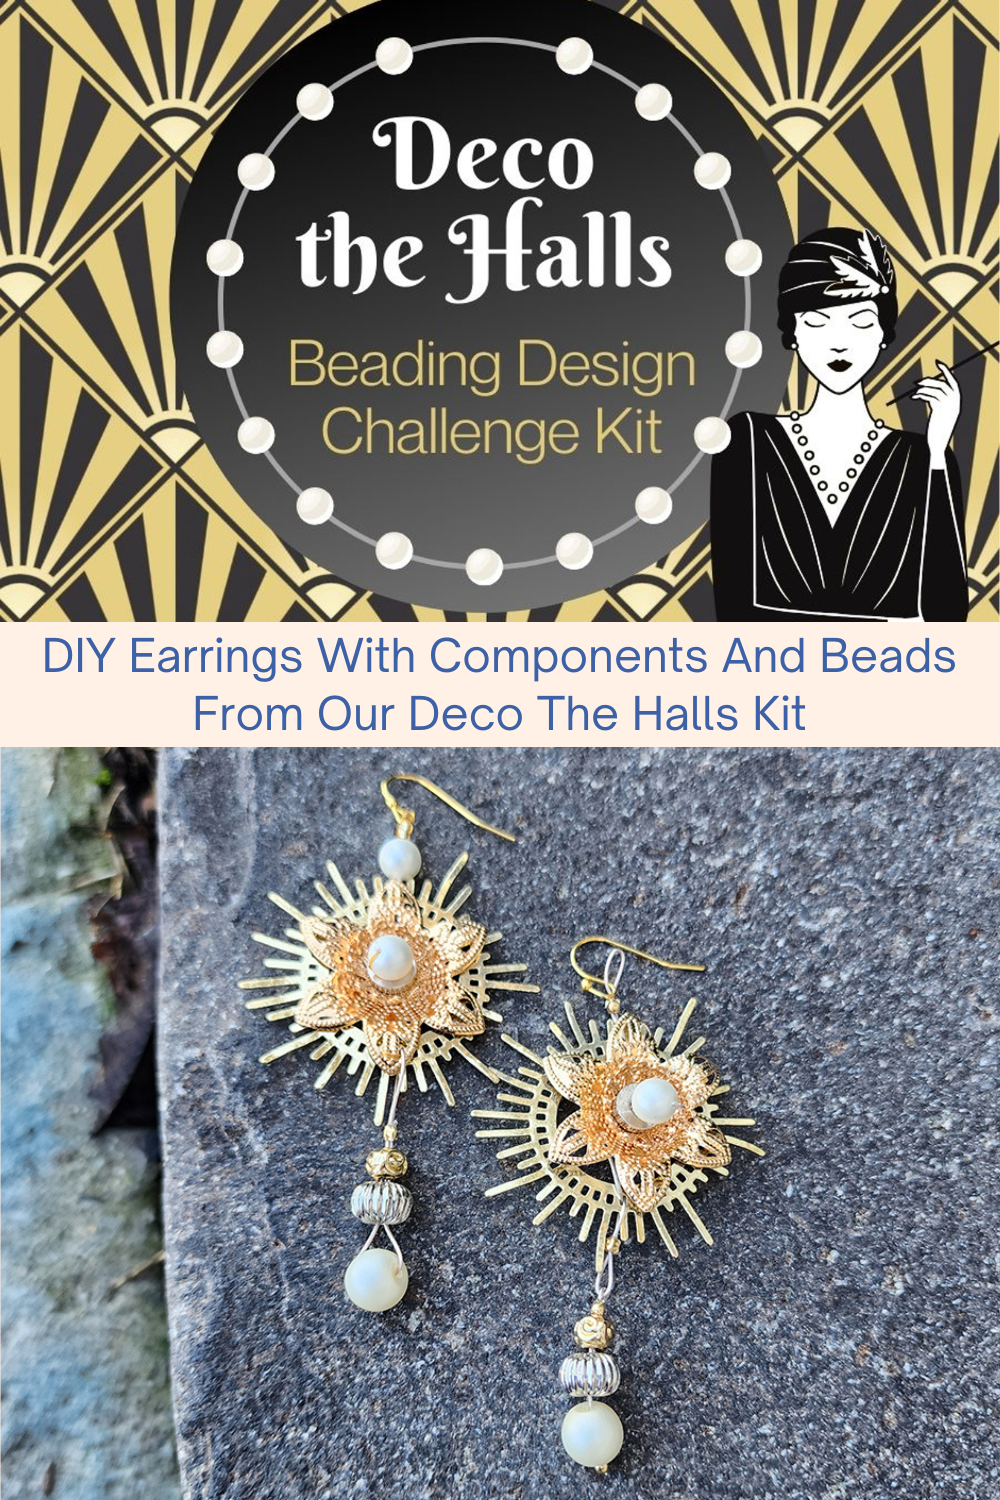 DIY Earrings With Components And Beads From Our Deco The Halls Kit Collage